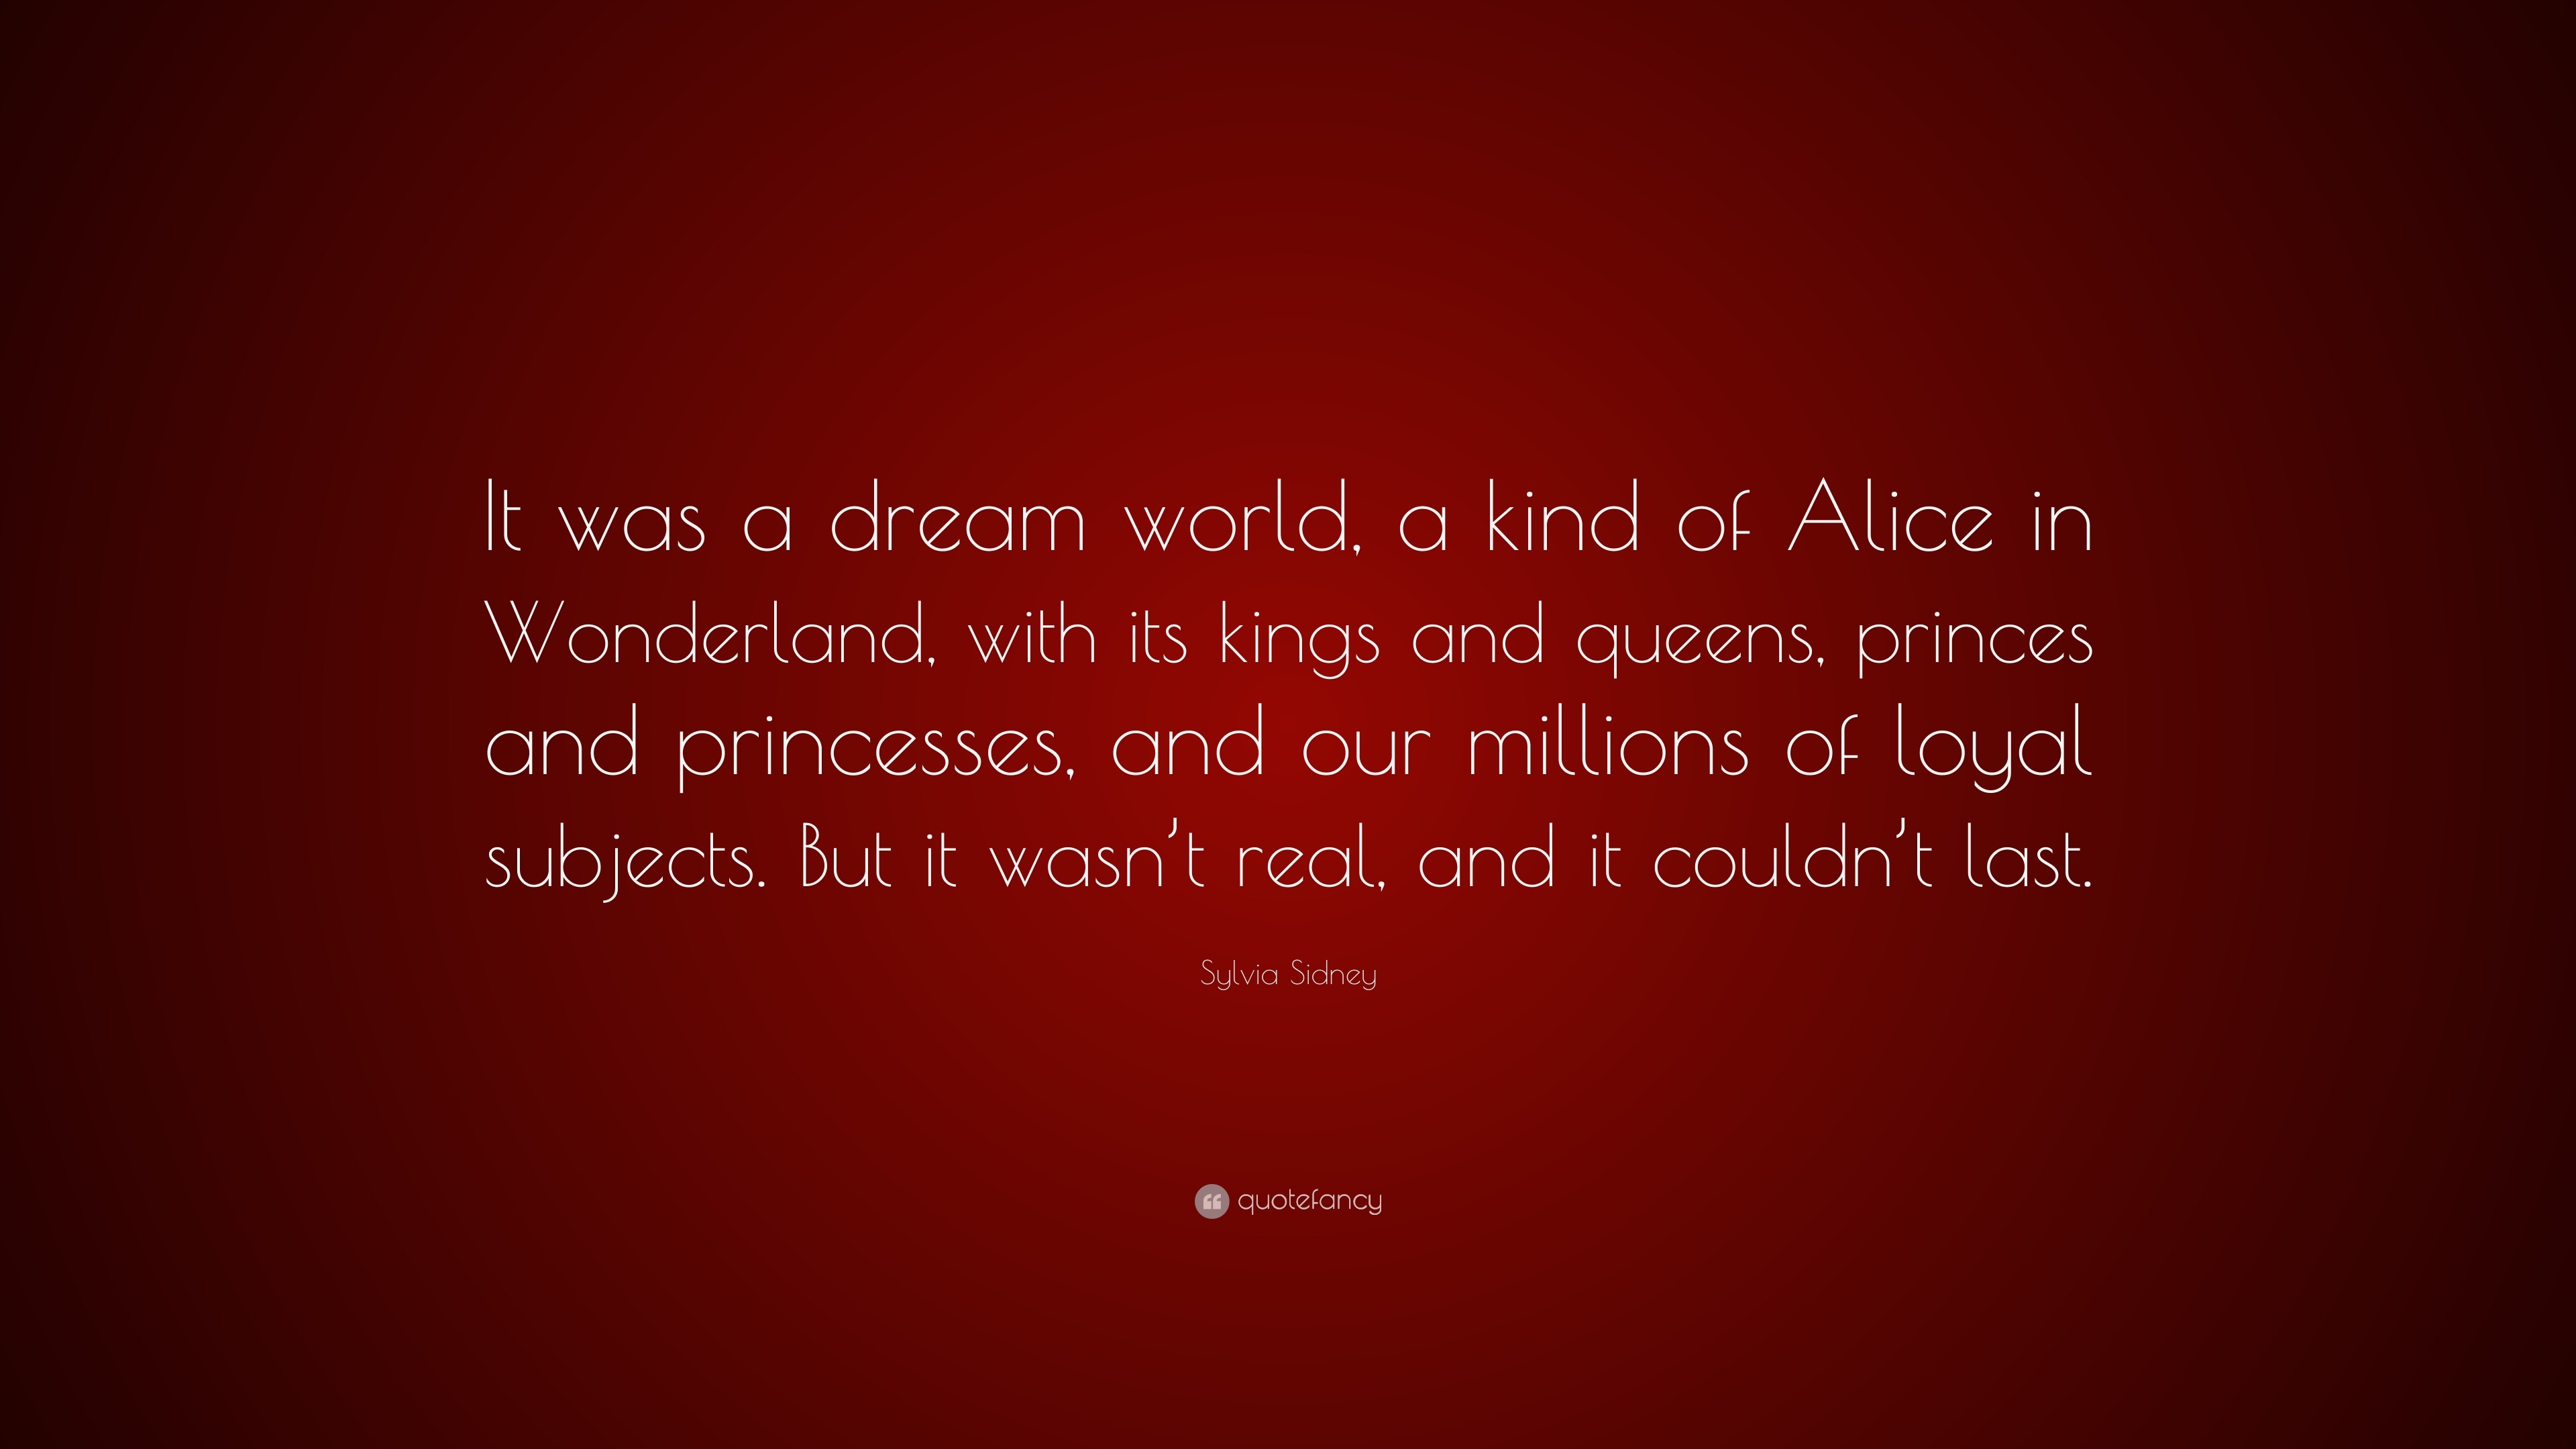 3840x2160 Sylvia Sidney Quote: “It was a dream world, a kind of Alice in